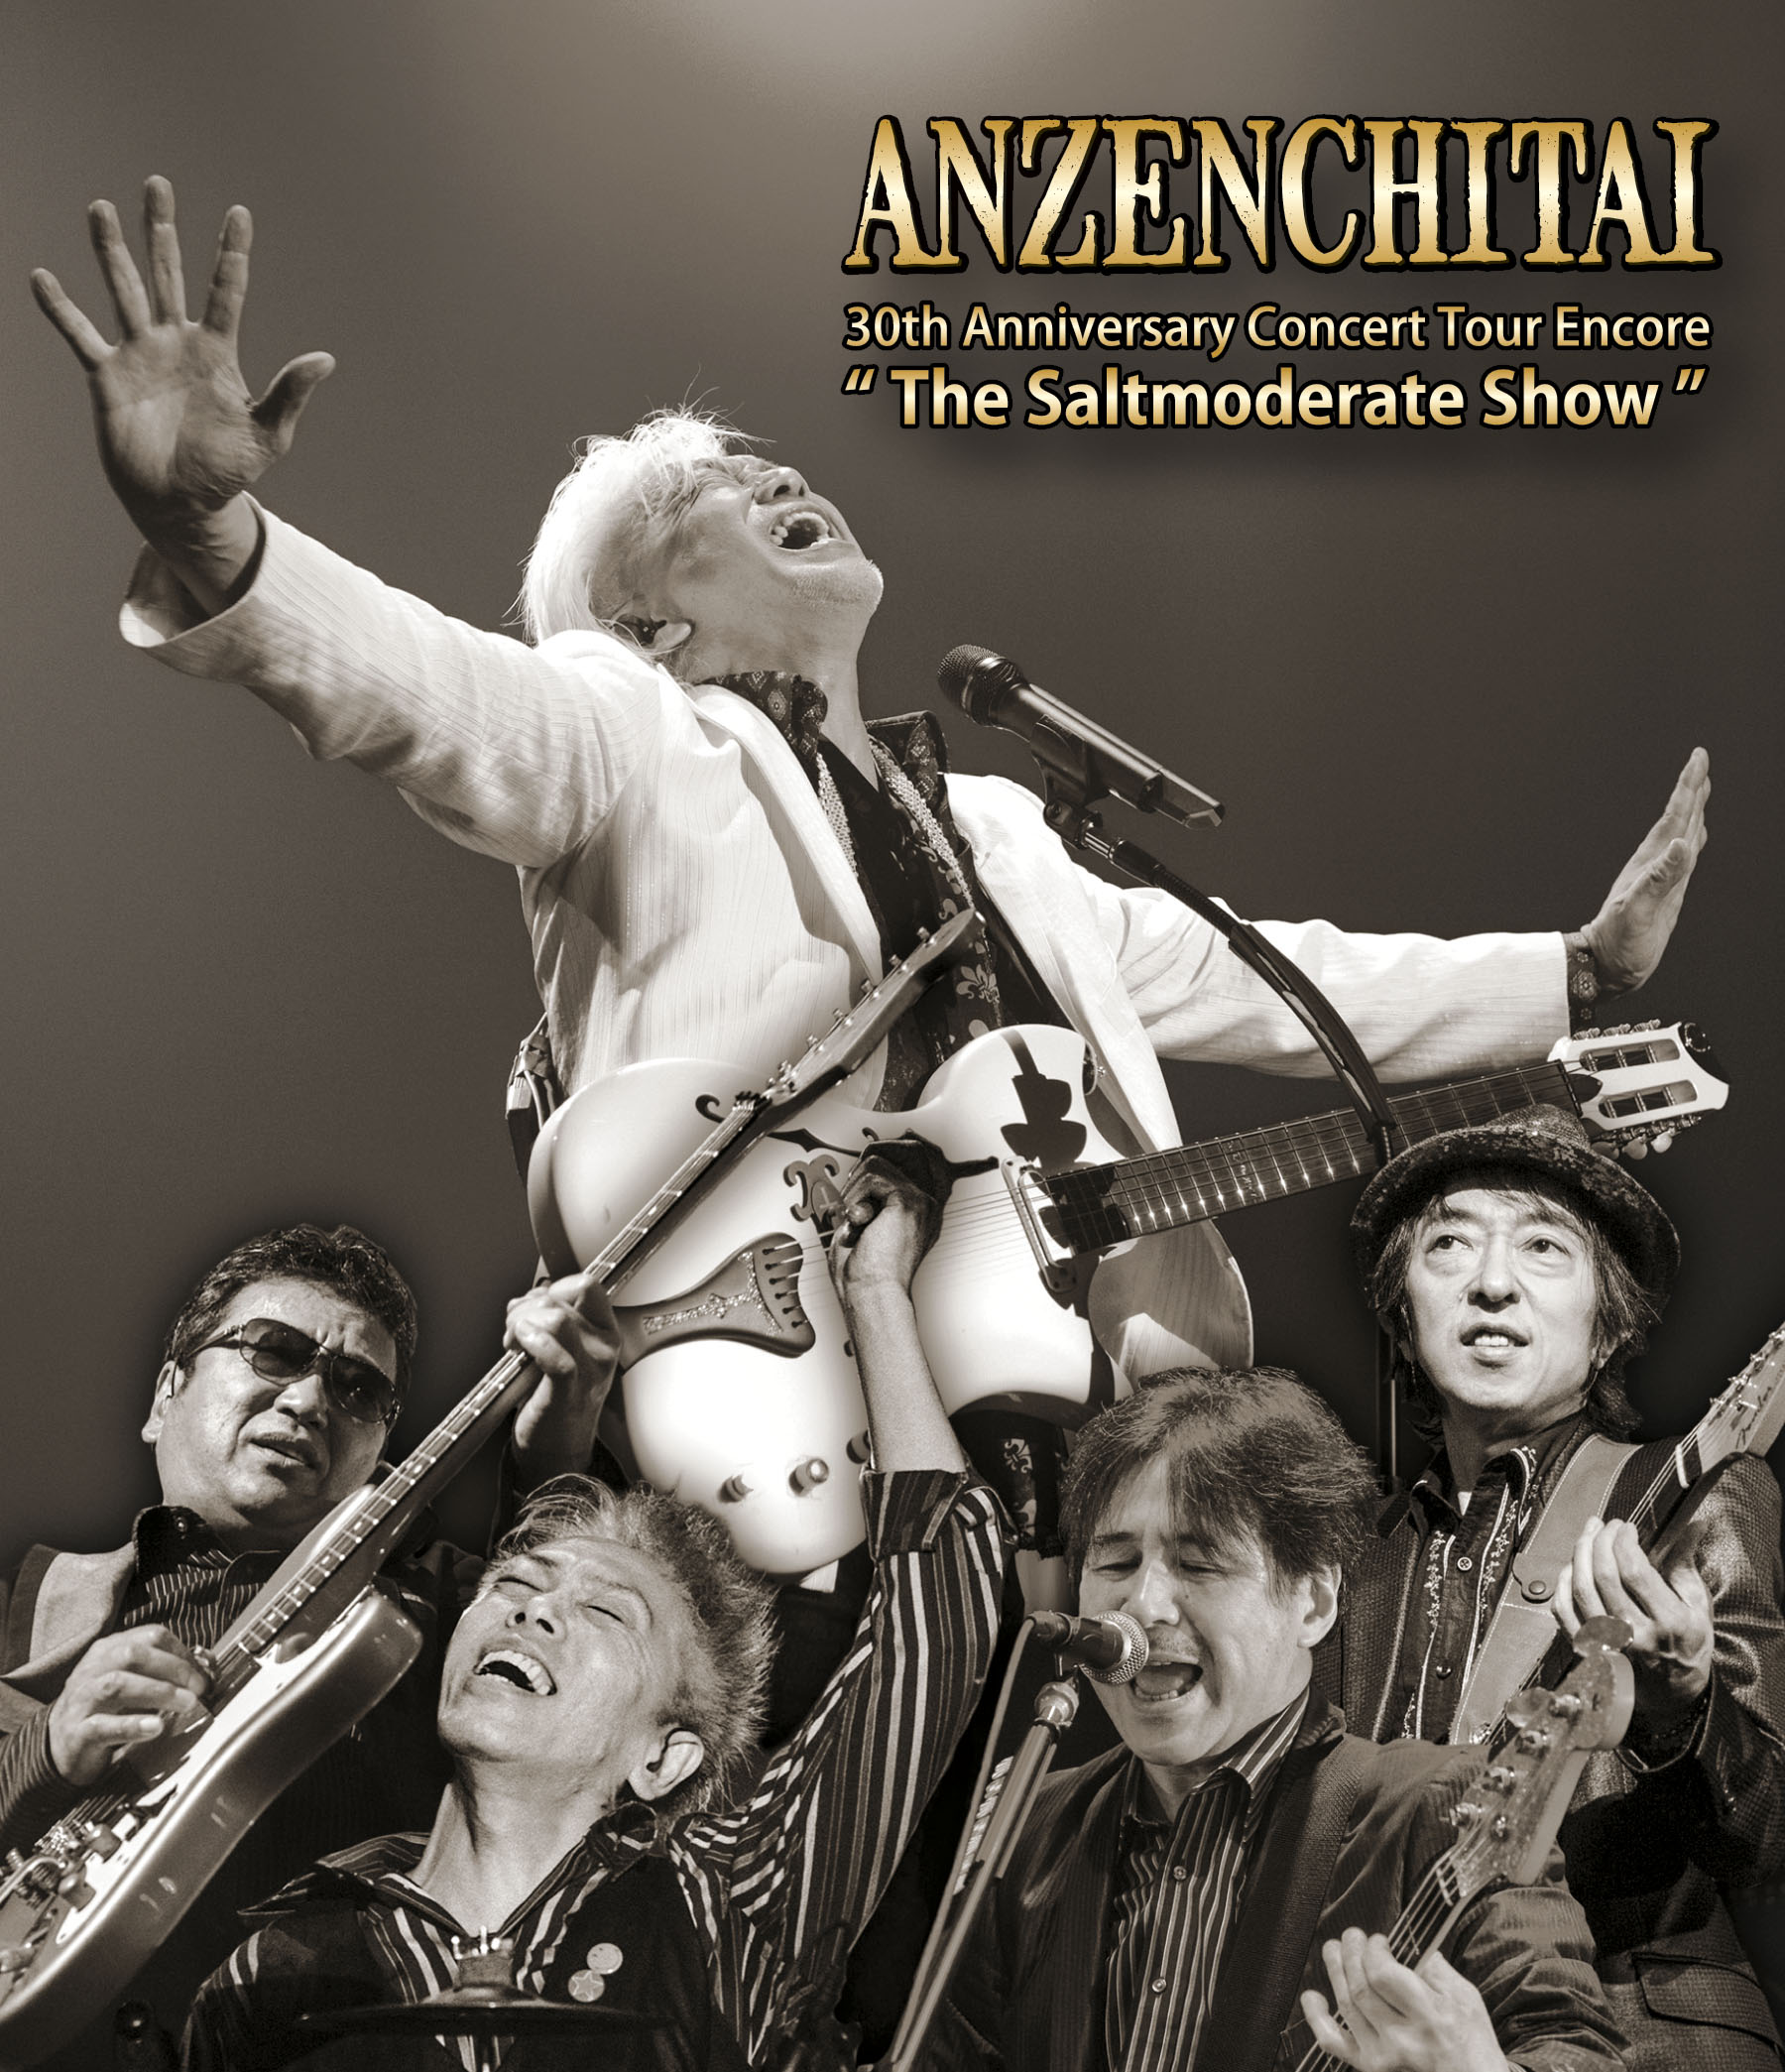 30th Anniversary Concert Tour Encore “The Saltmoderate Show”